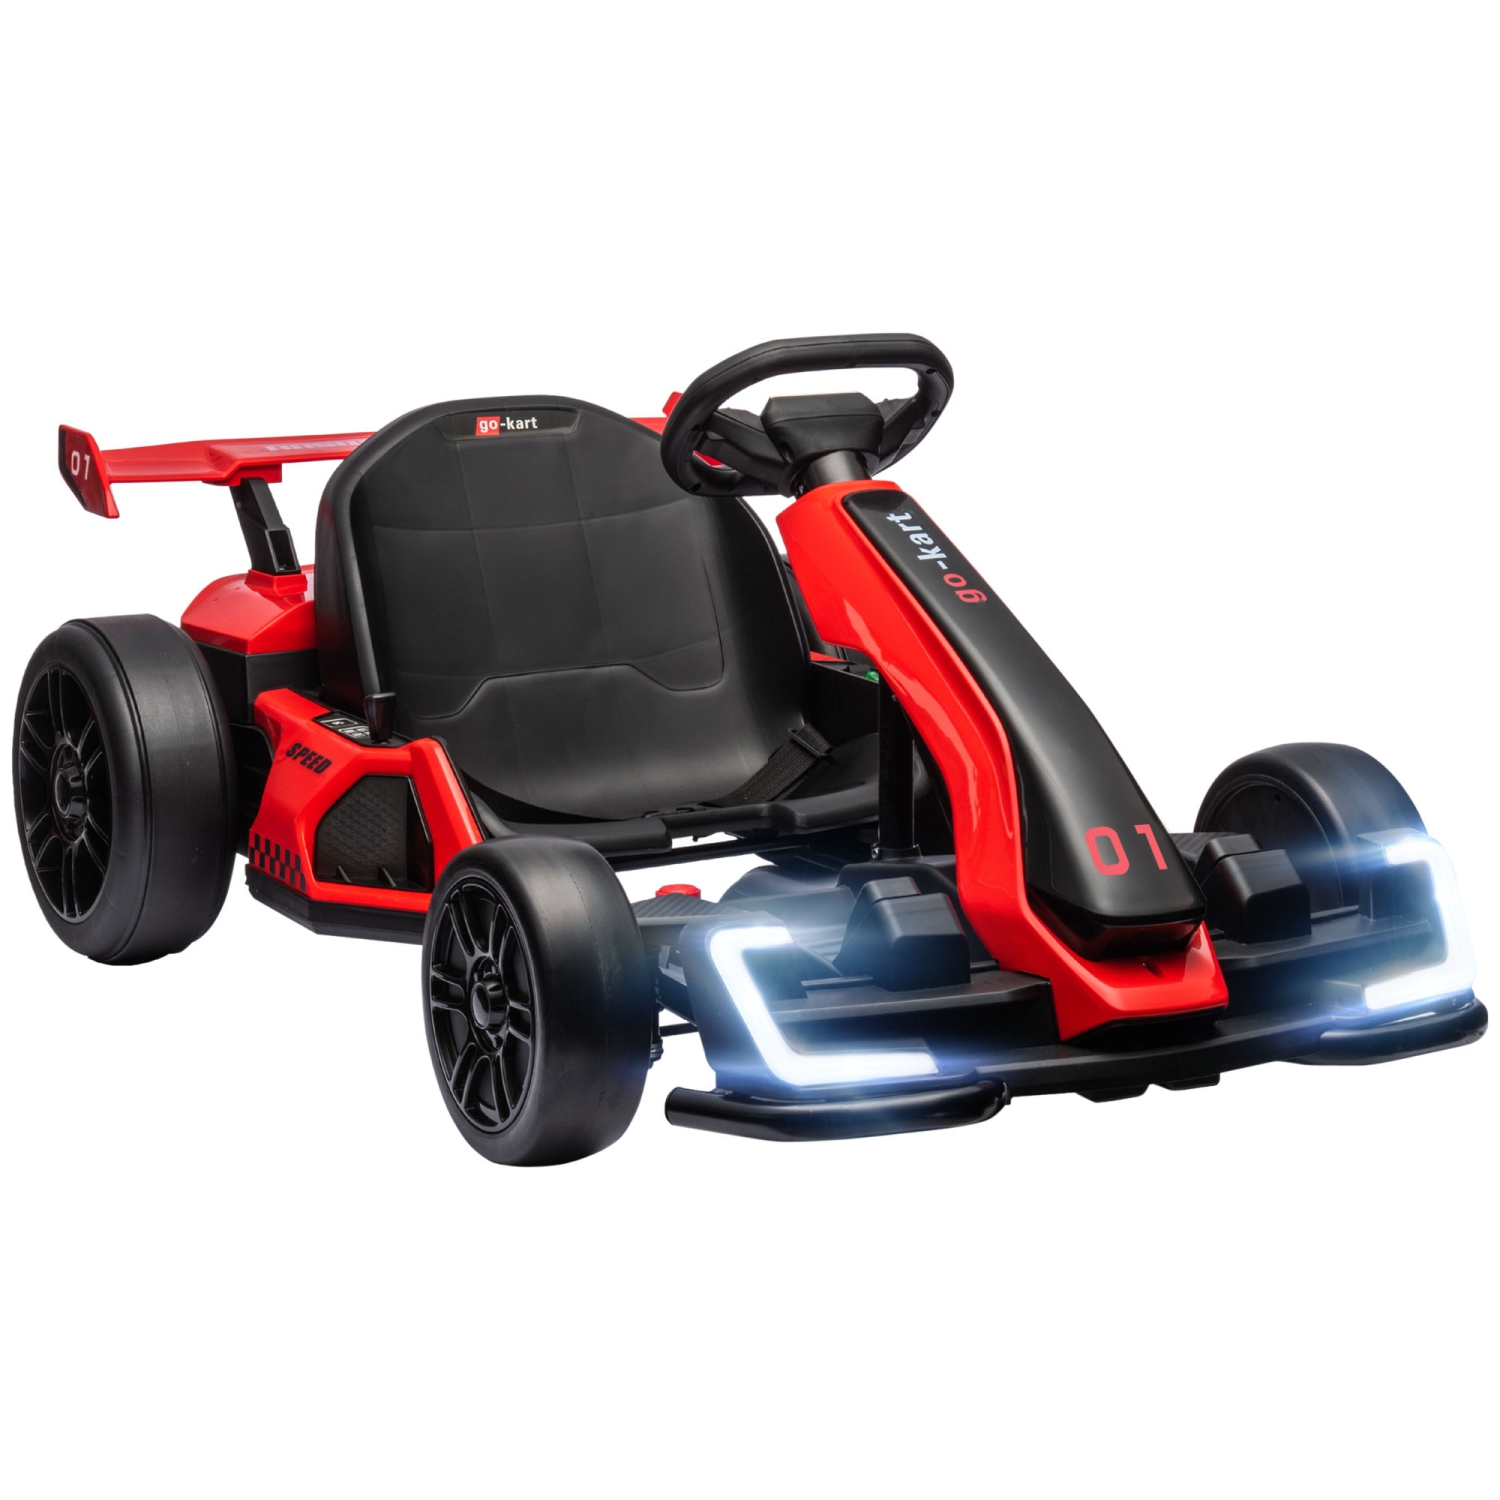 Aosom Go Kart, 24V Kids Drift Kart with Adjustable Seat, Battery Powered Ride on Toy with Slow Start, Button Start, Music, Honking Horn, Lights, for 6-12 Years Old, Red